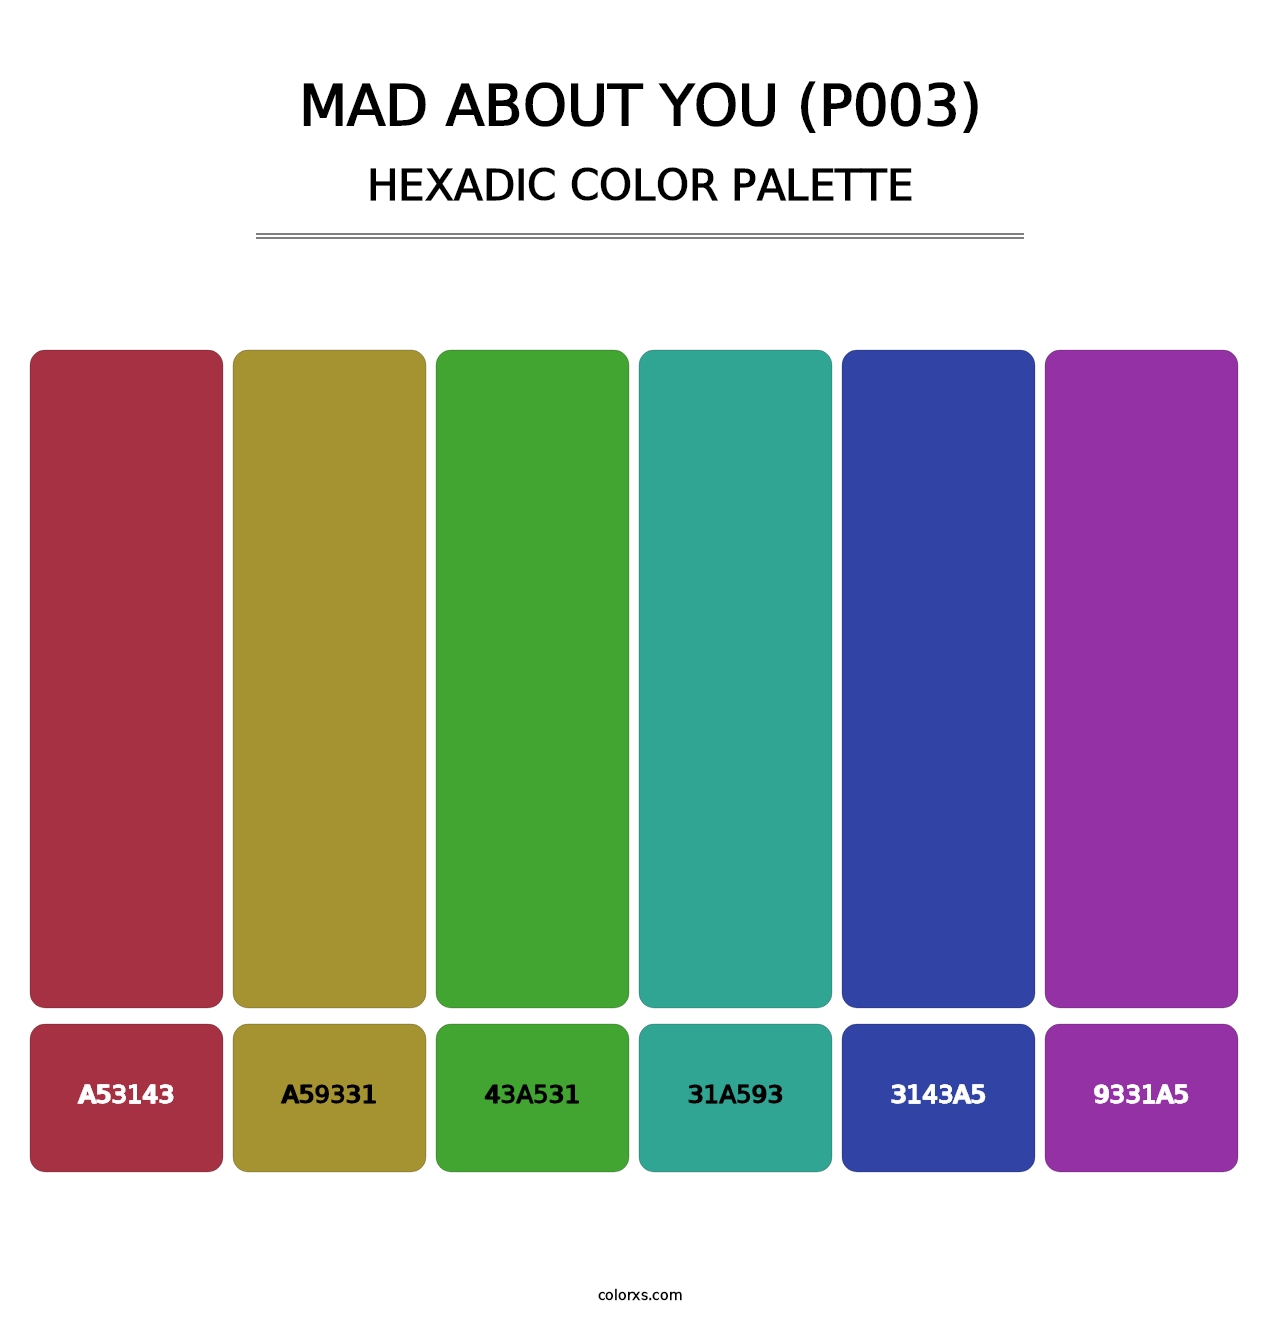 Mad About You (P003) - Hexadic Color Palette